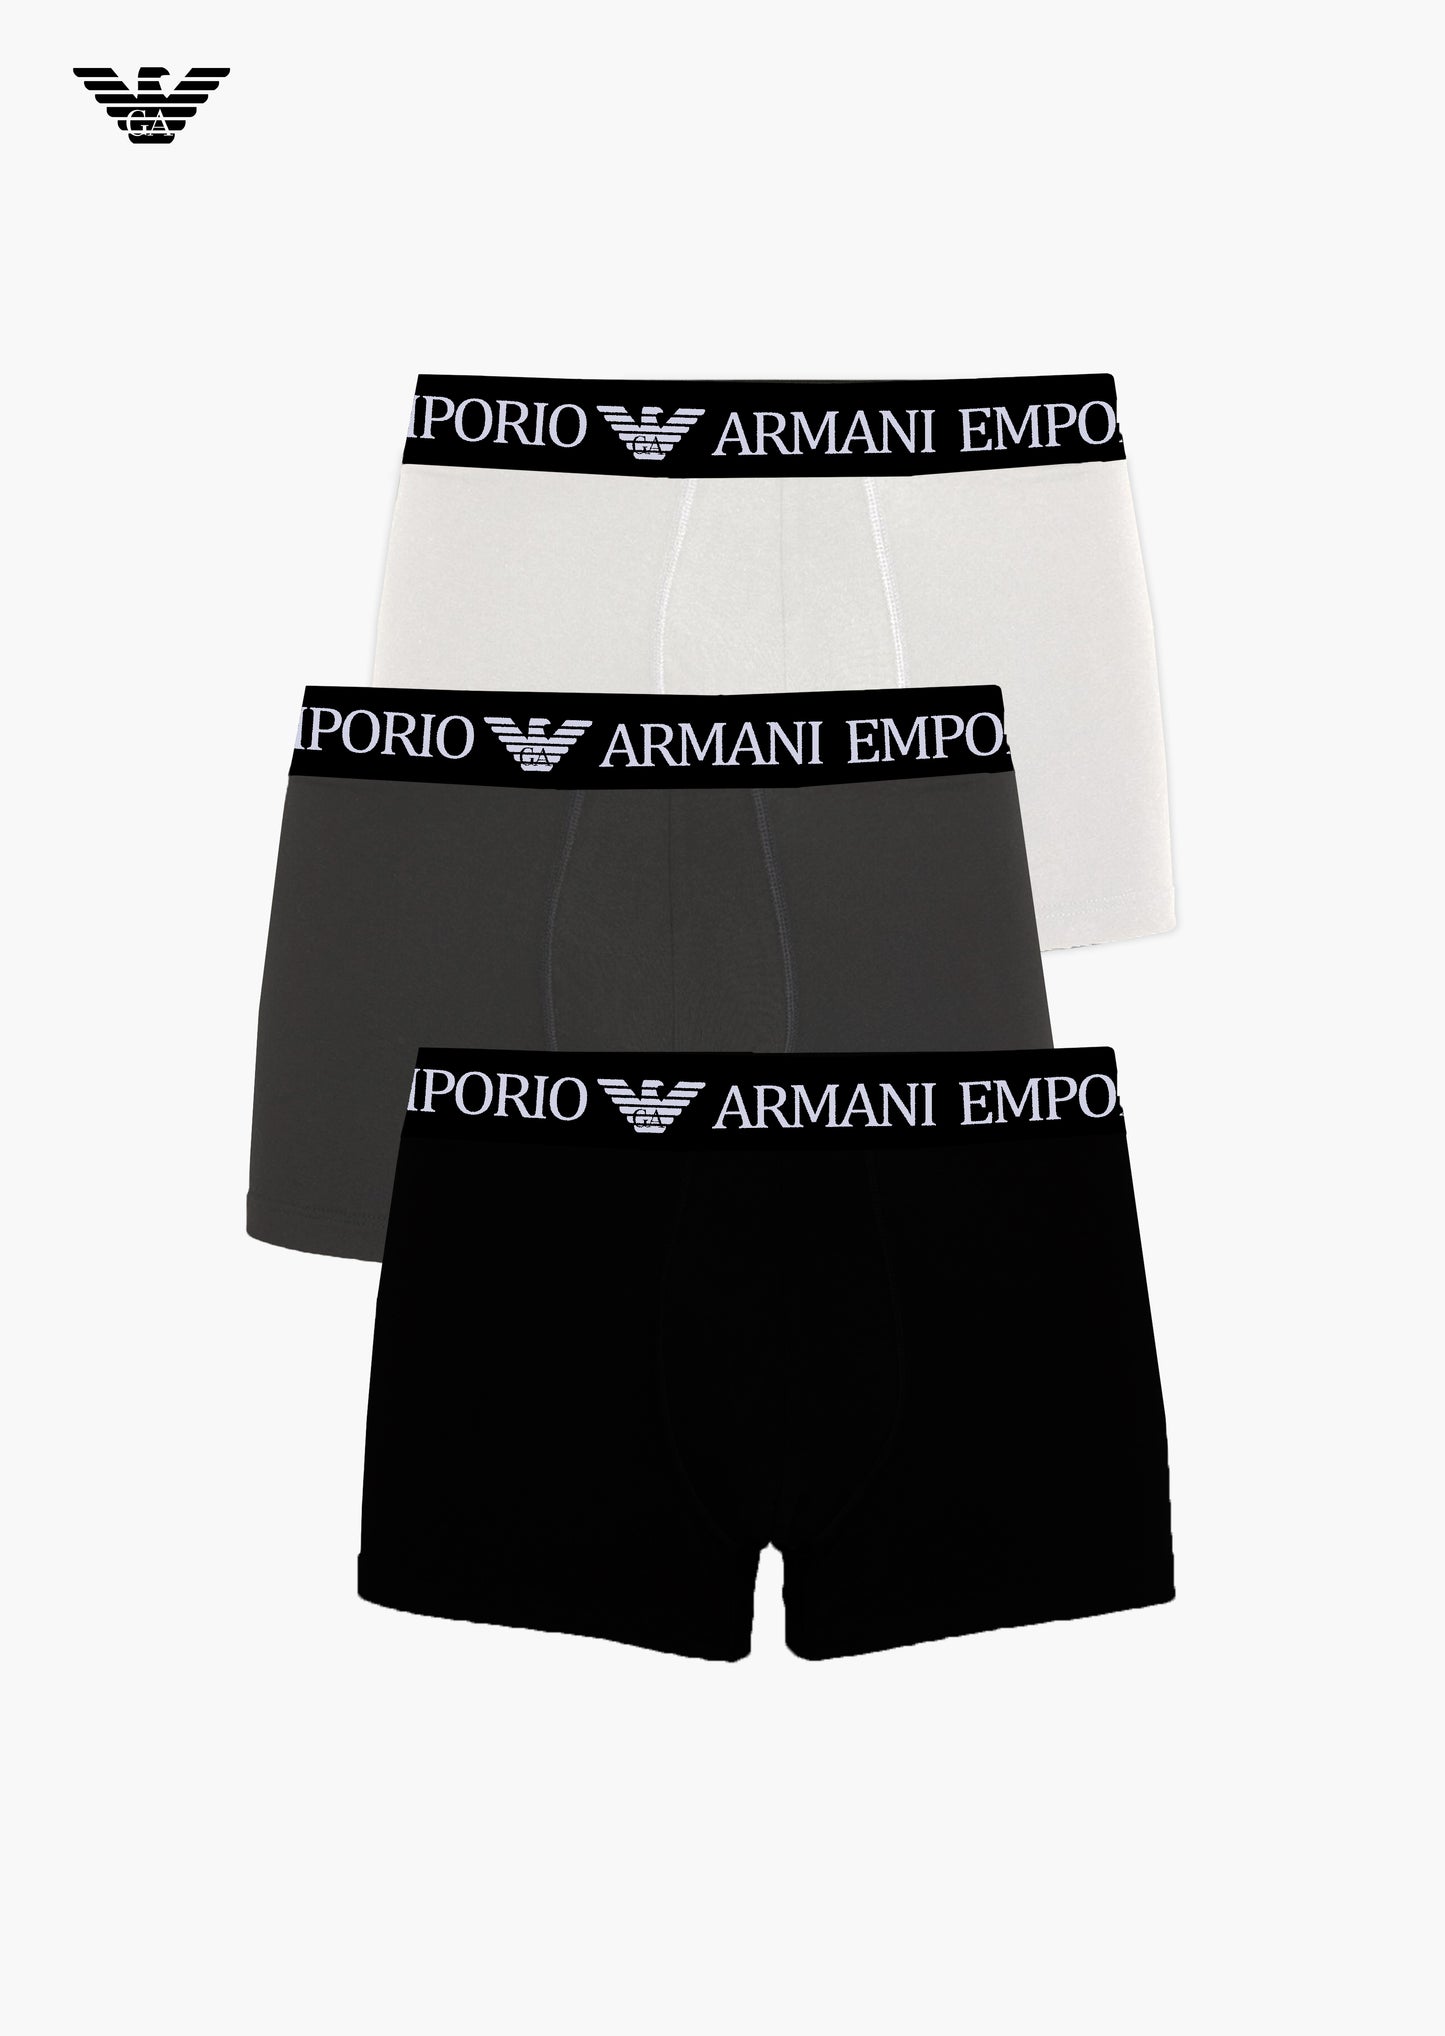 A-R-M-A-N-I Boxers (Pack of 3)